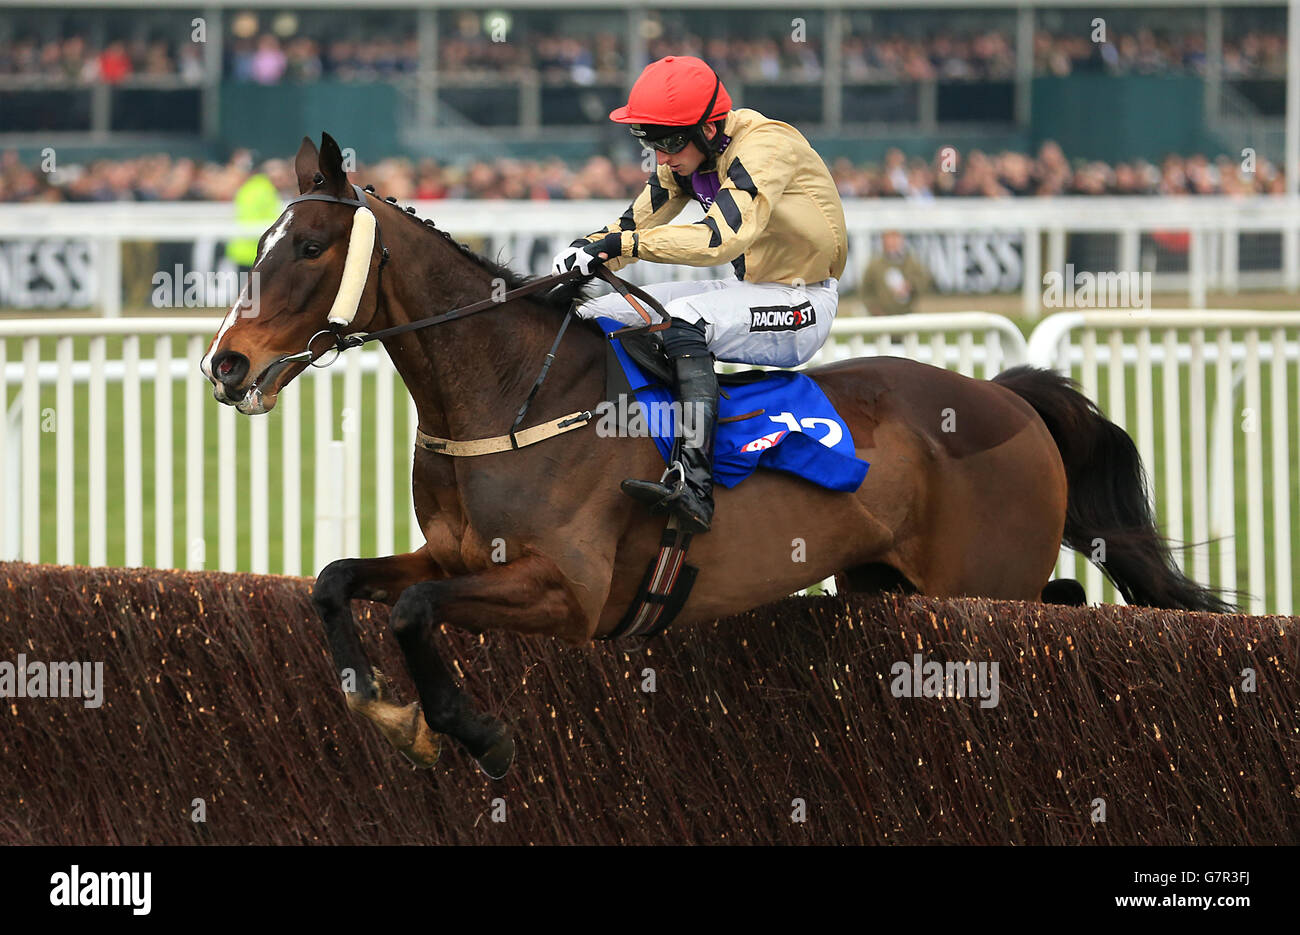 Horse Racing - 2015 Cheltenham Festival - Gold Cup Day - Cheltenham Racecourse. Jockey Mr P W Mullins on On His Own during the Betfred Cheltenham Gold Cup Chase. Stock Photo